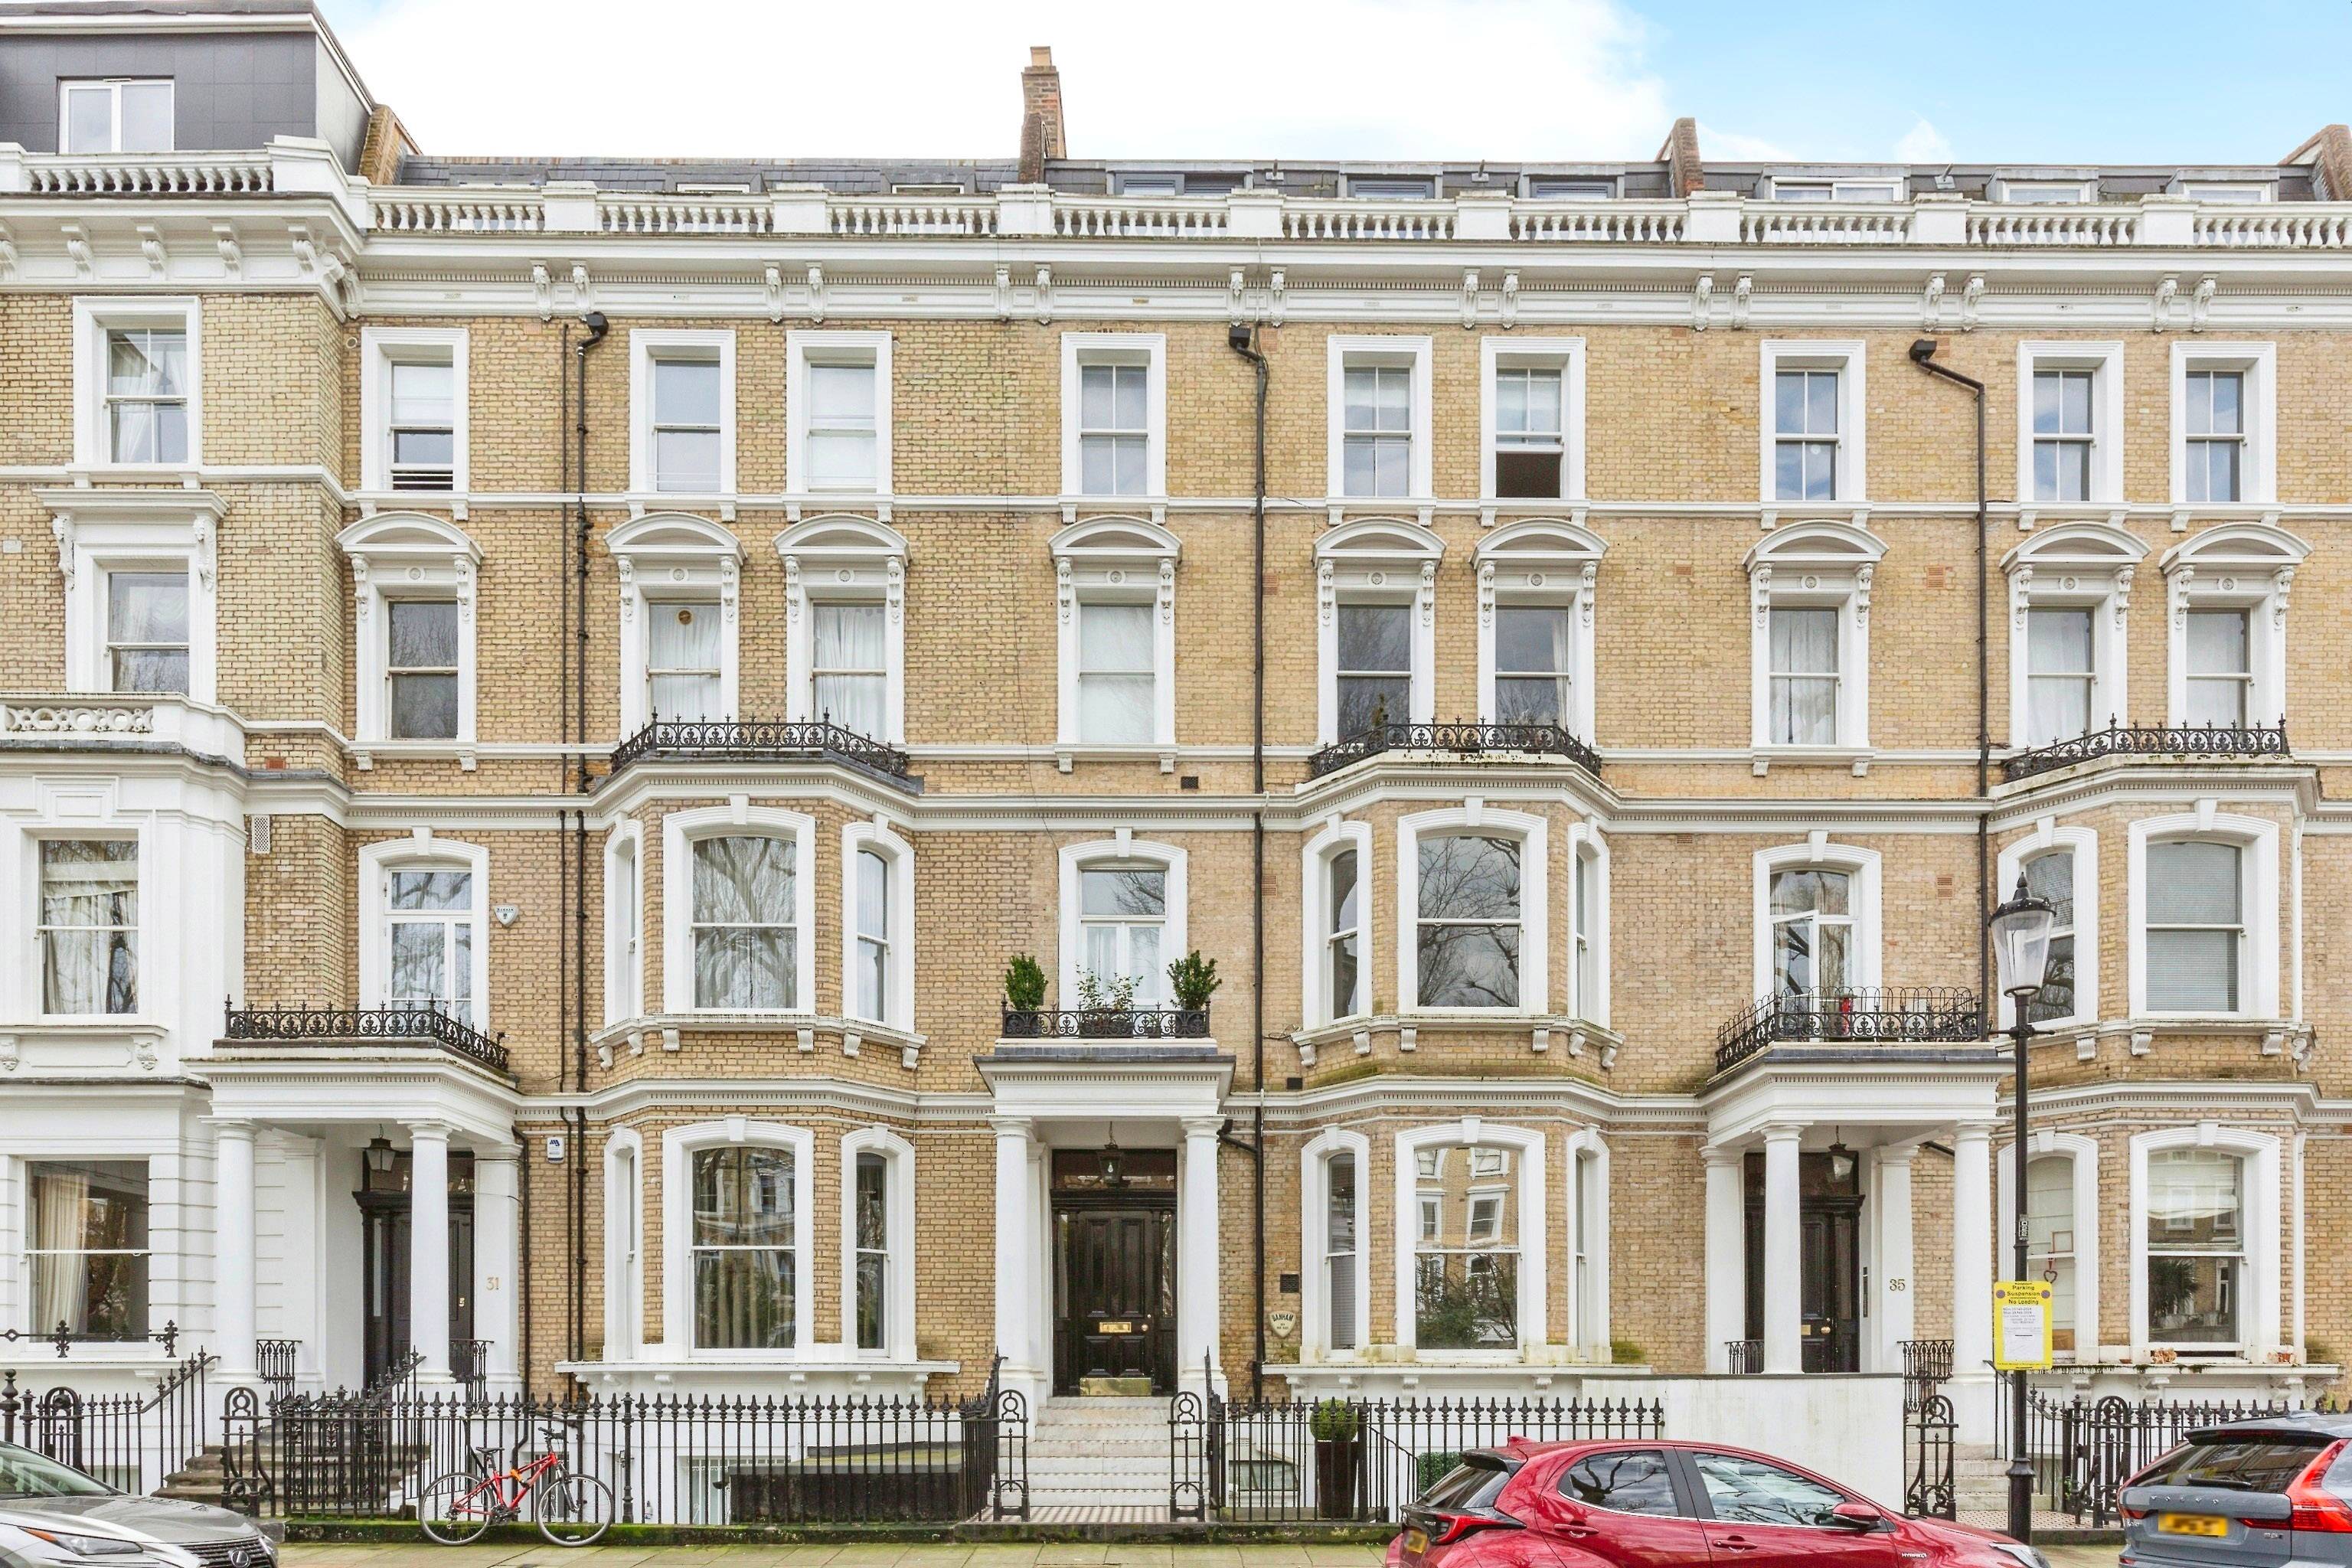 A fabulous two bedroom, two bathroom south-facing garden apartment